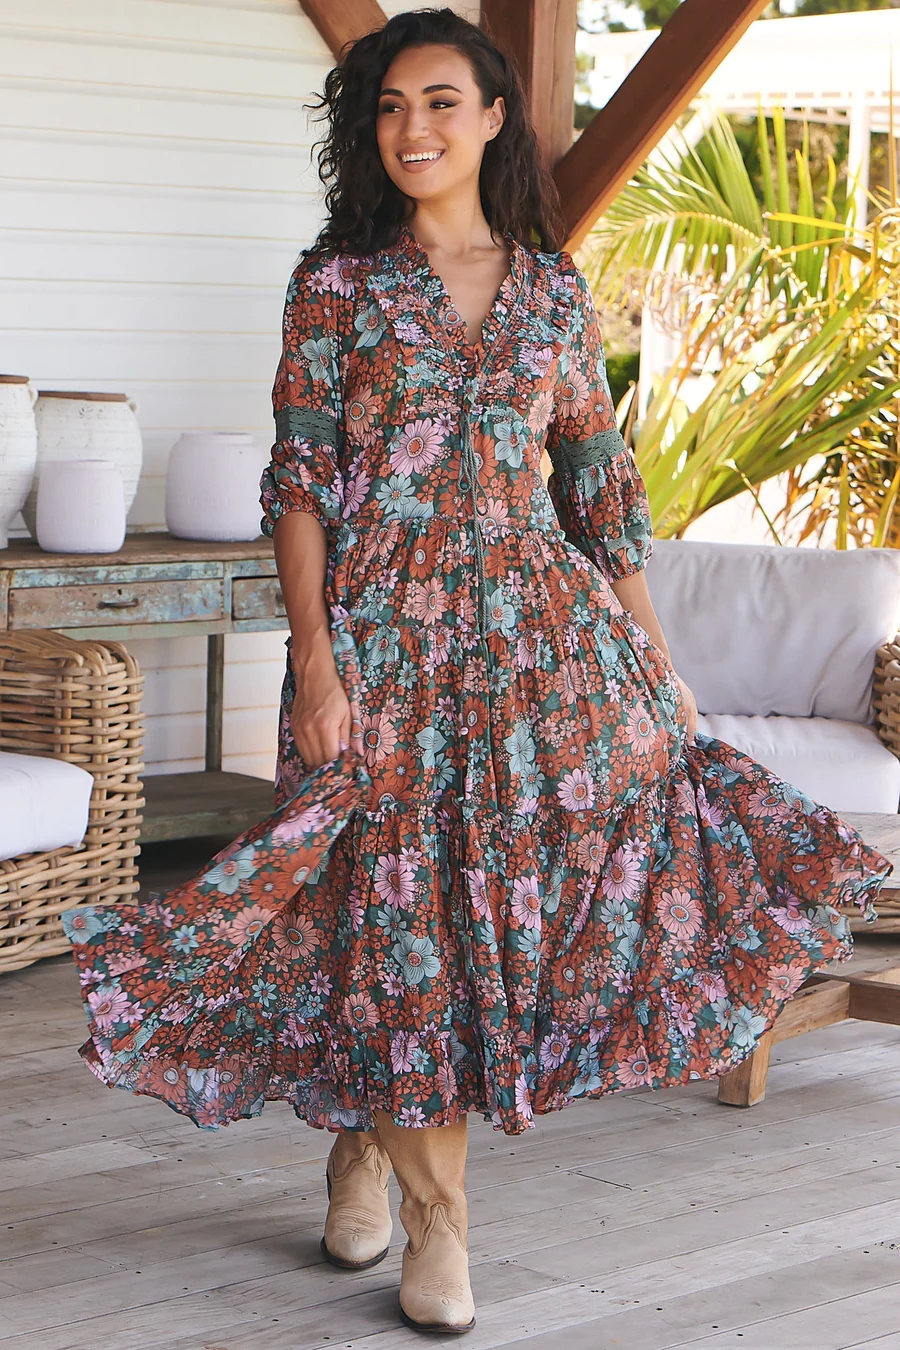 Floral maxi dress - this is one of the best style dresses to hide tummy and midriff bulge.